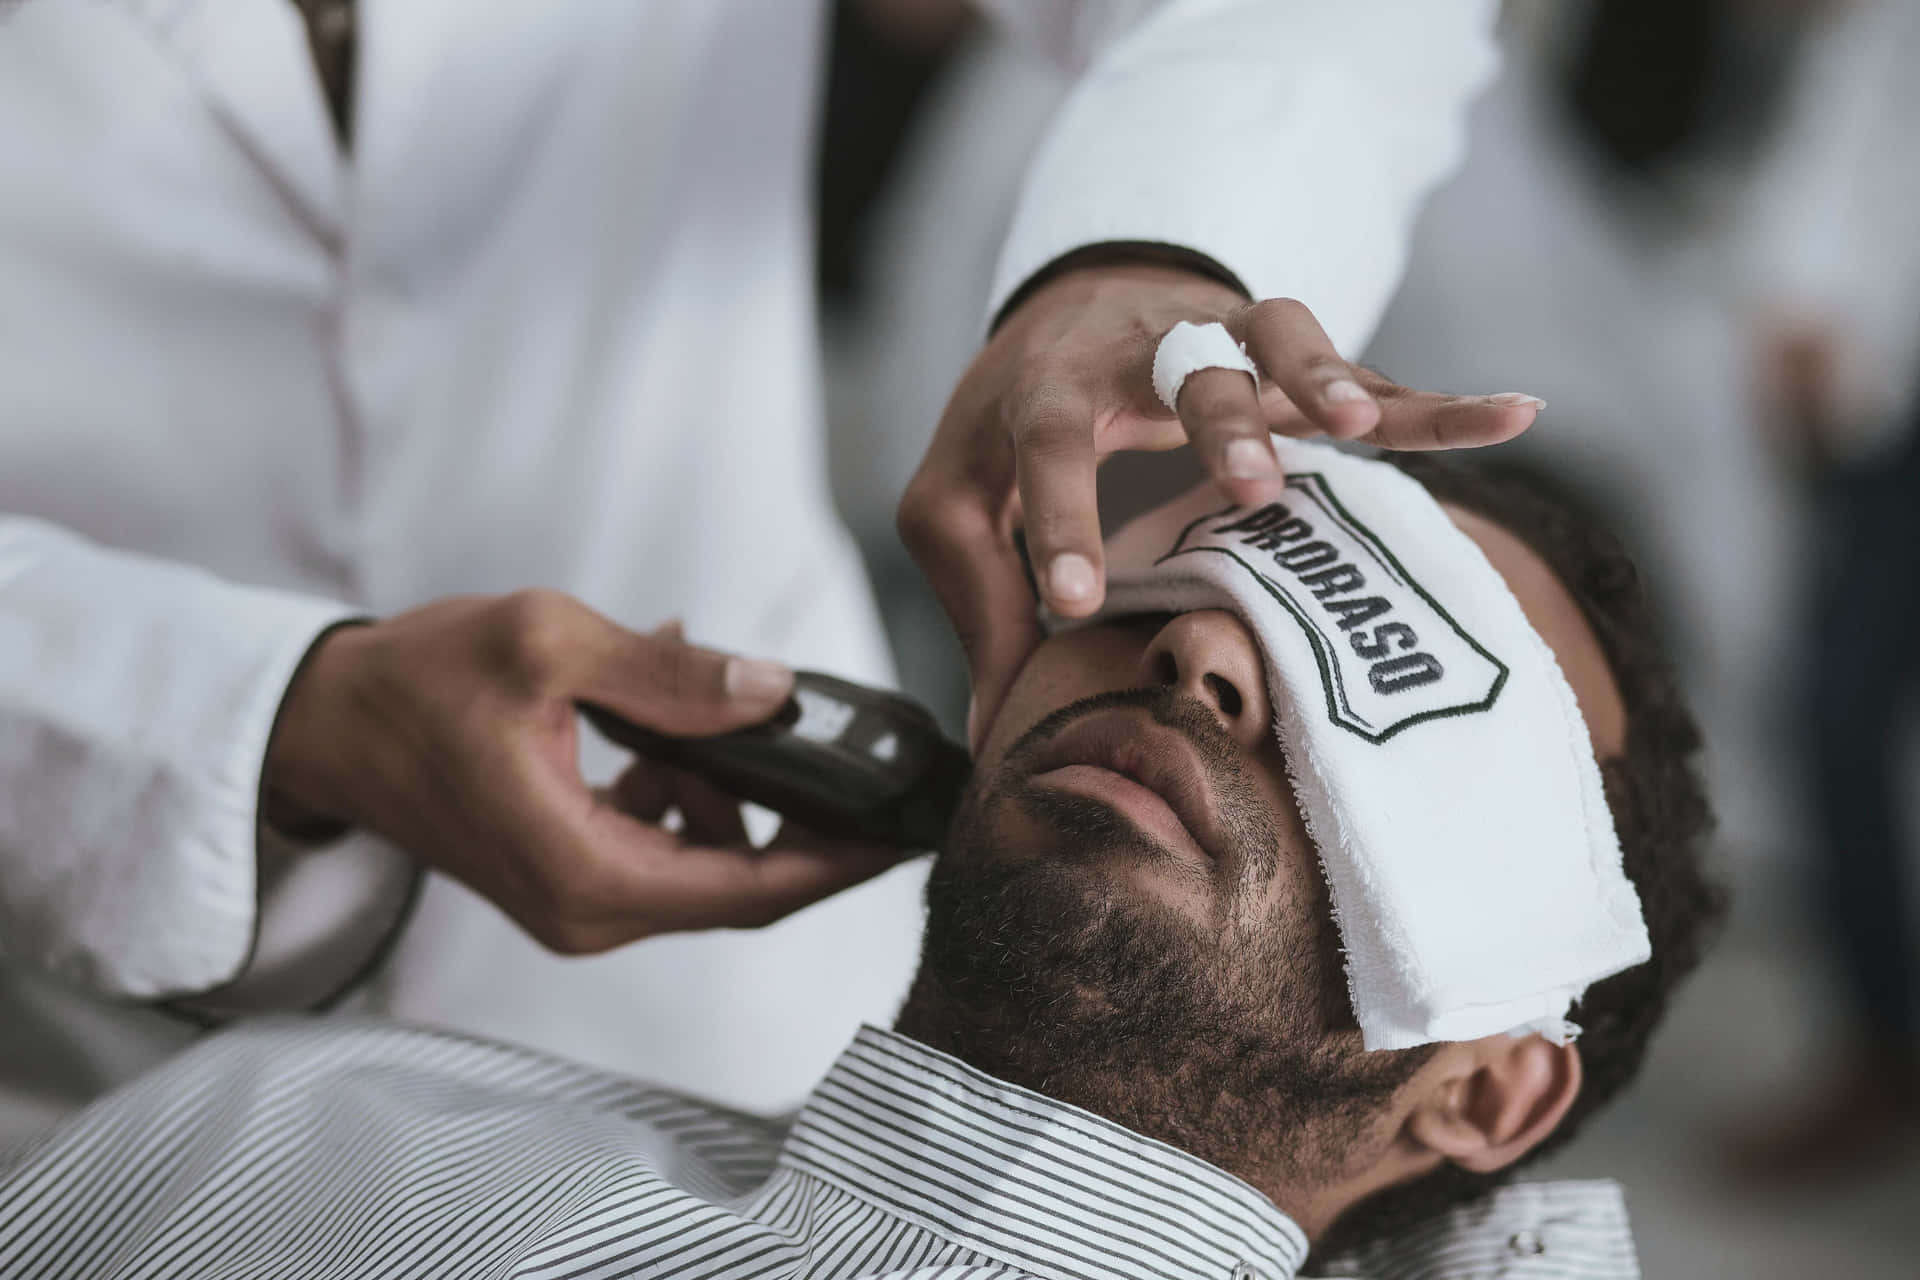 Professional barbers at work crafting custom styles